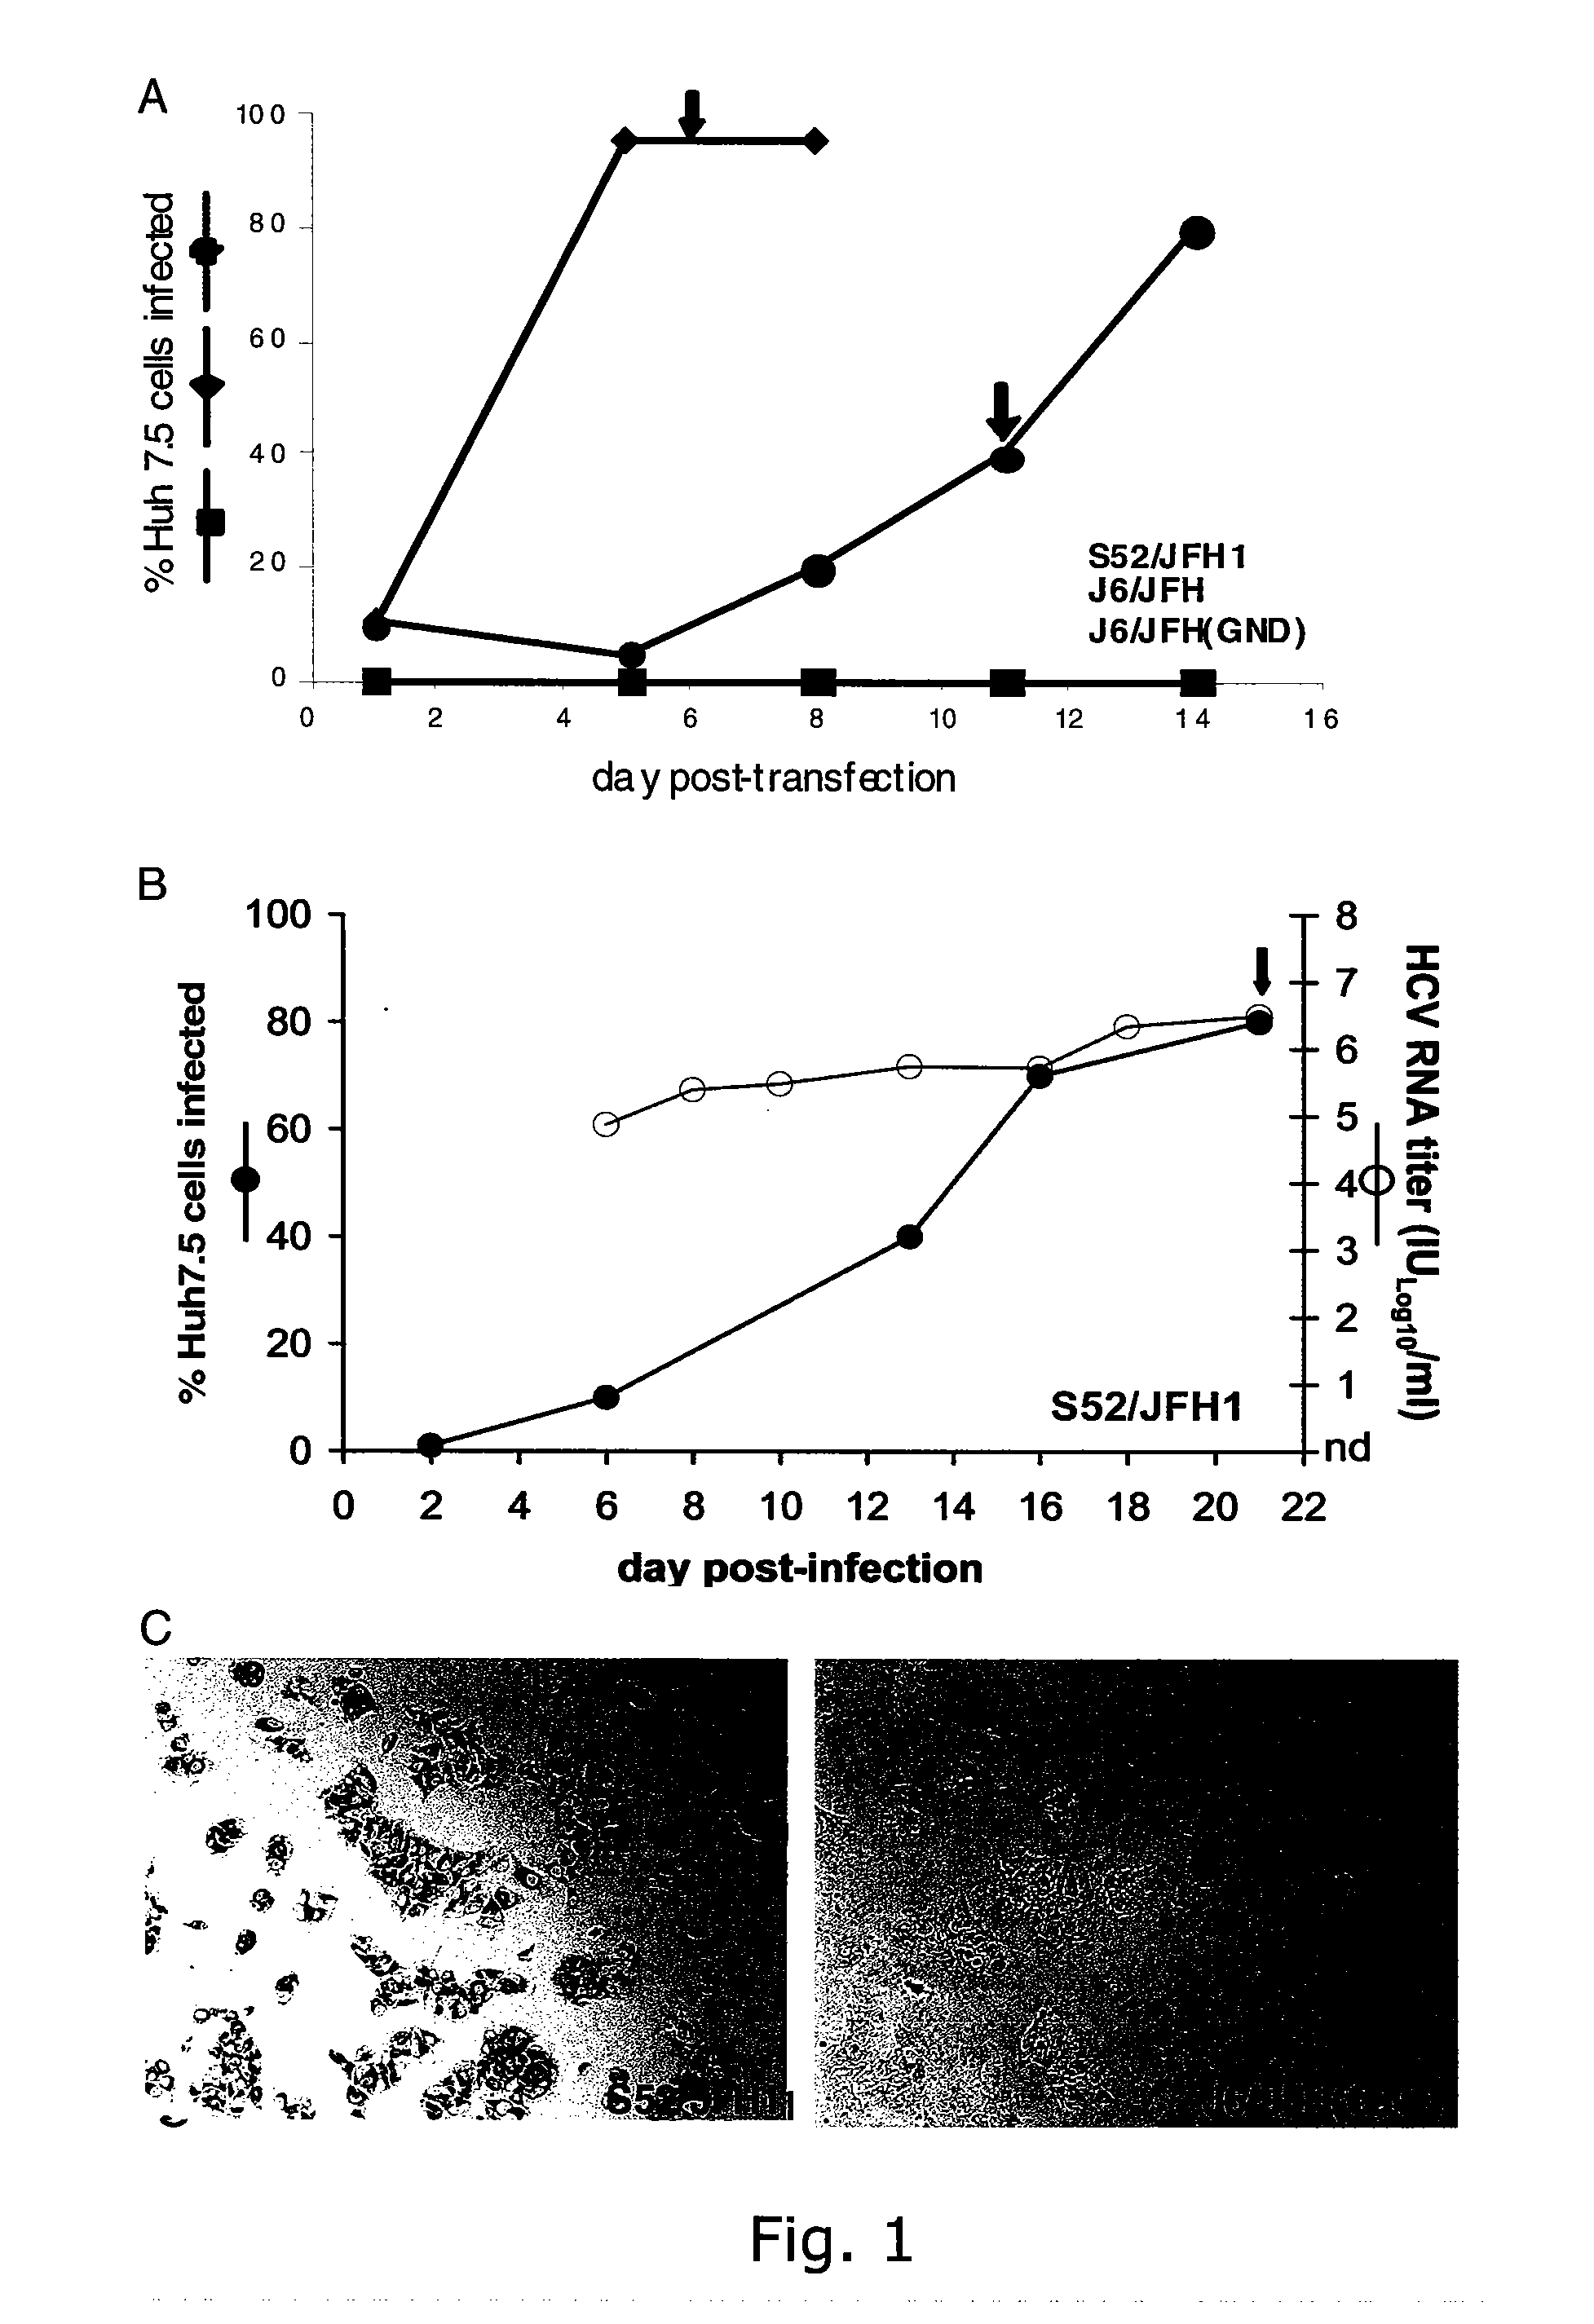 Cell culture system of a hepatitis c genotype 3a and 2a chimera